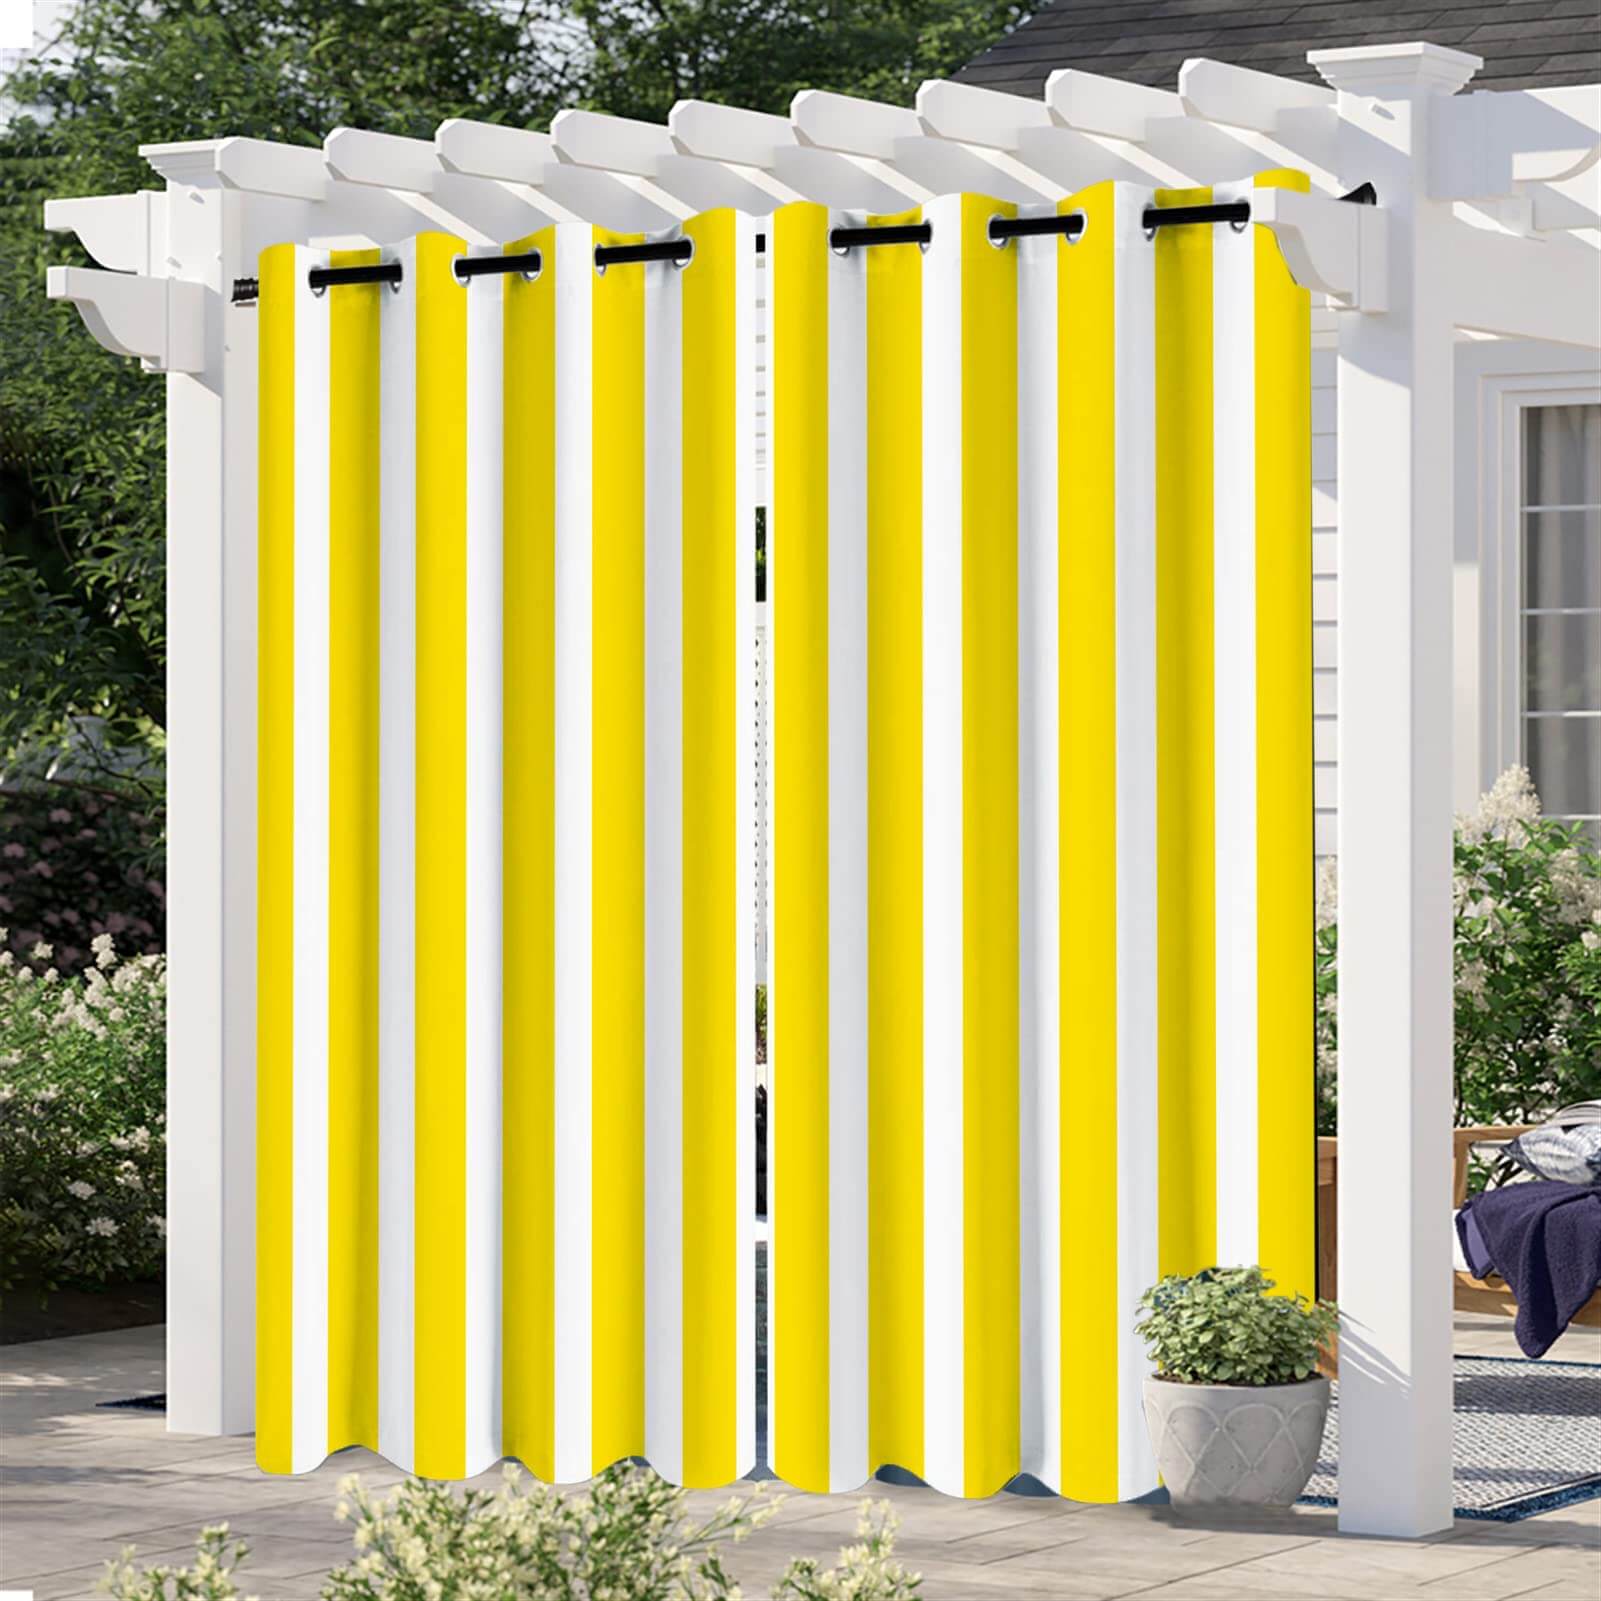 Yellow Stripe Curtains/Drapes 1 Panel | Waterproof Curtains Grommet Top & Bottom | Custom Outdoor Curtains